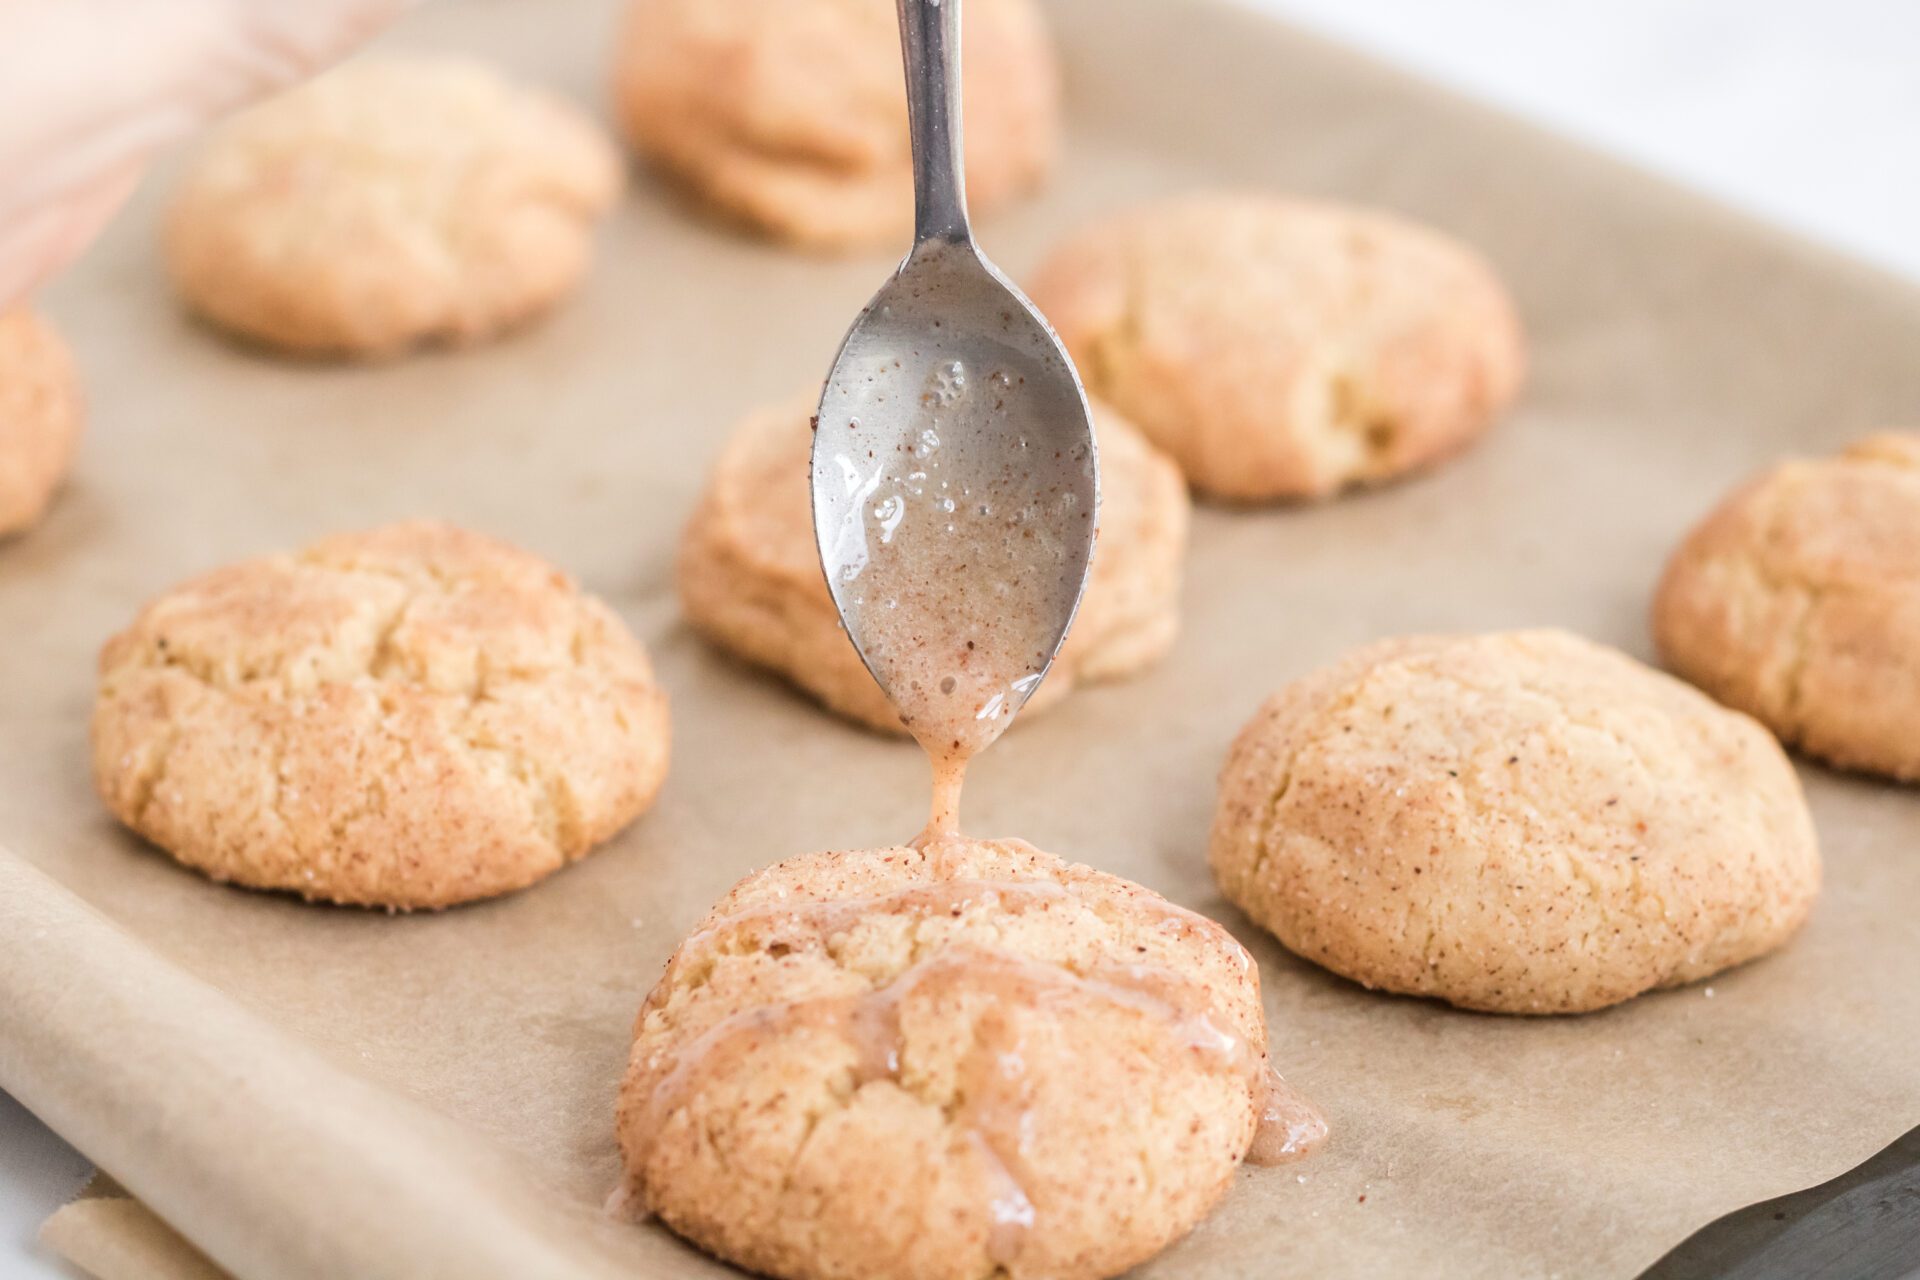 Eggnog cookies takes traditional eggnog and turns into a super delightful cookie! These melt in your mouth treats will have your craving them all night long!